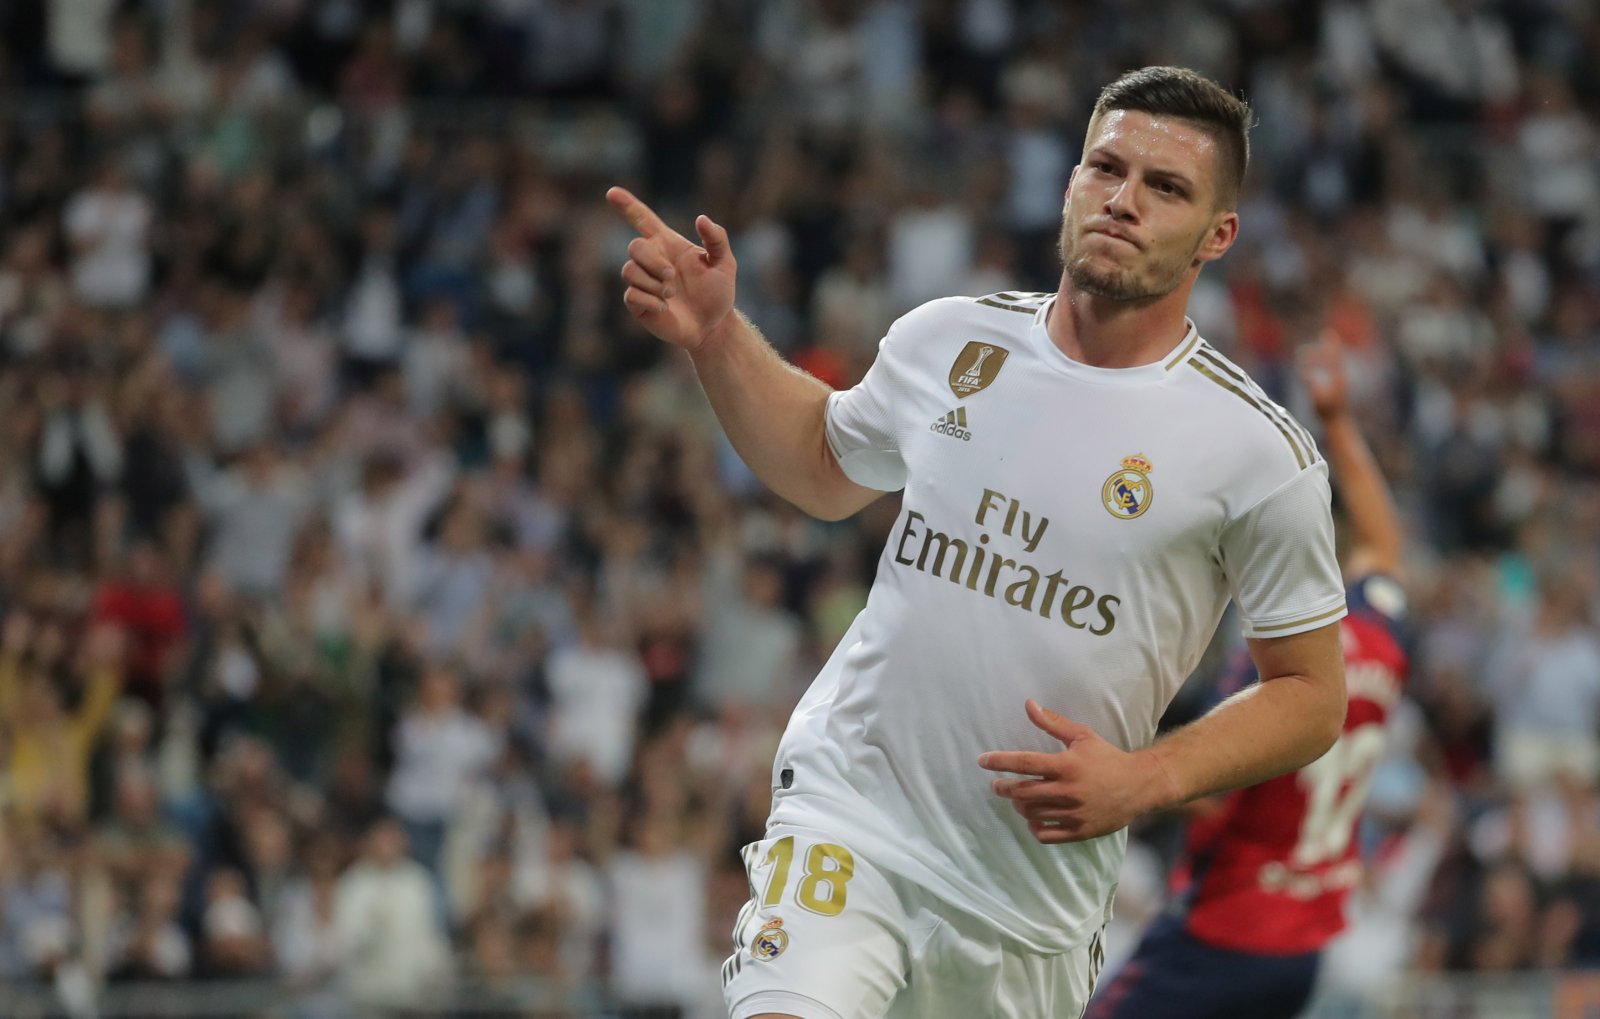 Luka Jovic reportedly accepted Zidane's decision to bench him against Levante - Bóng Đá